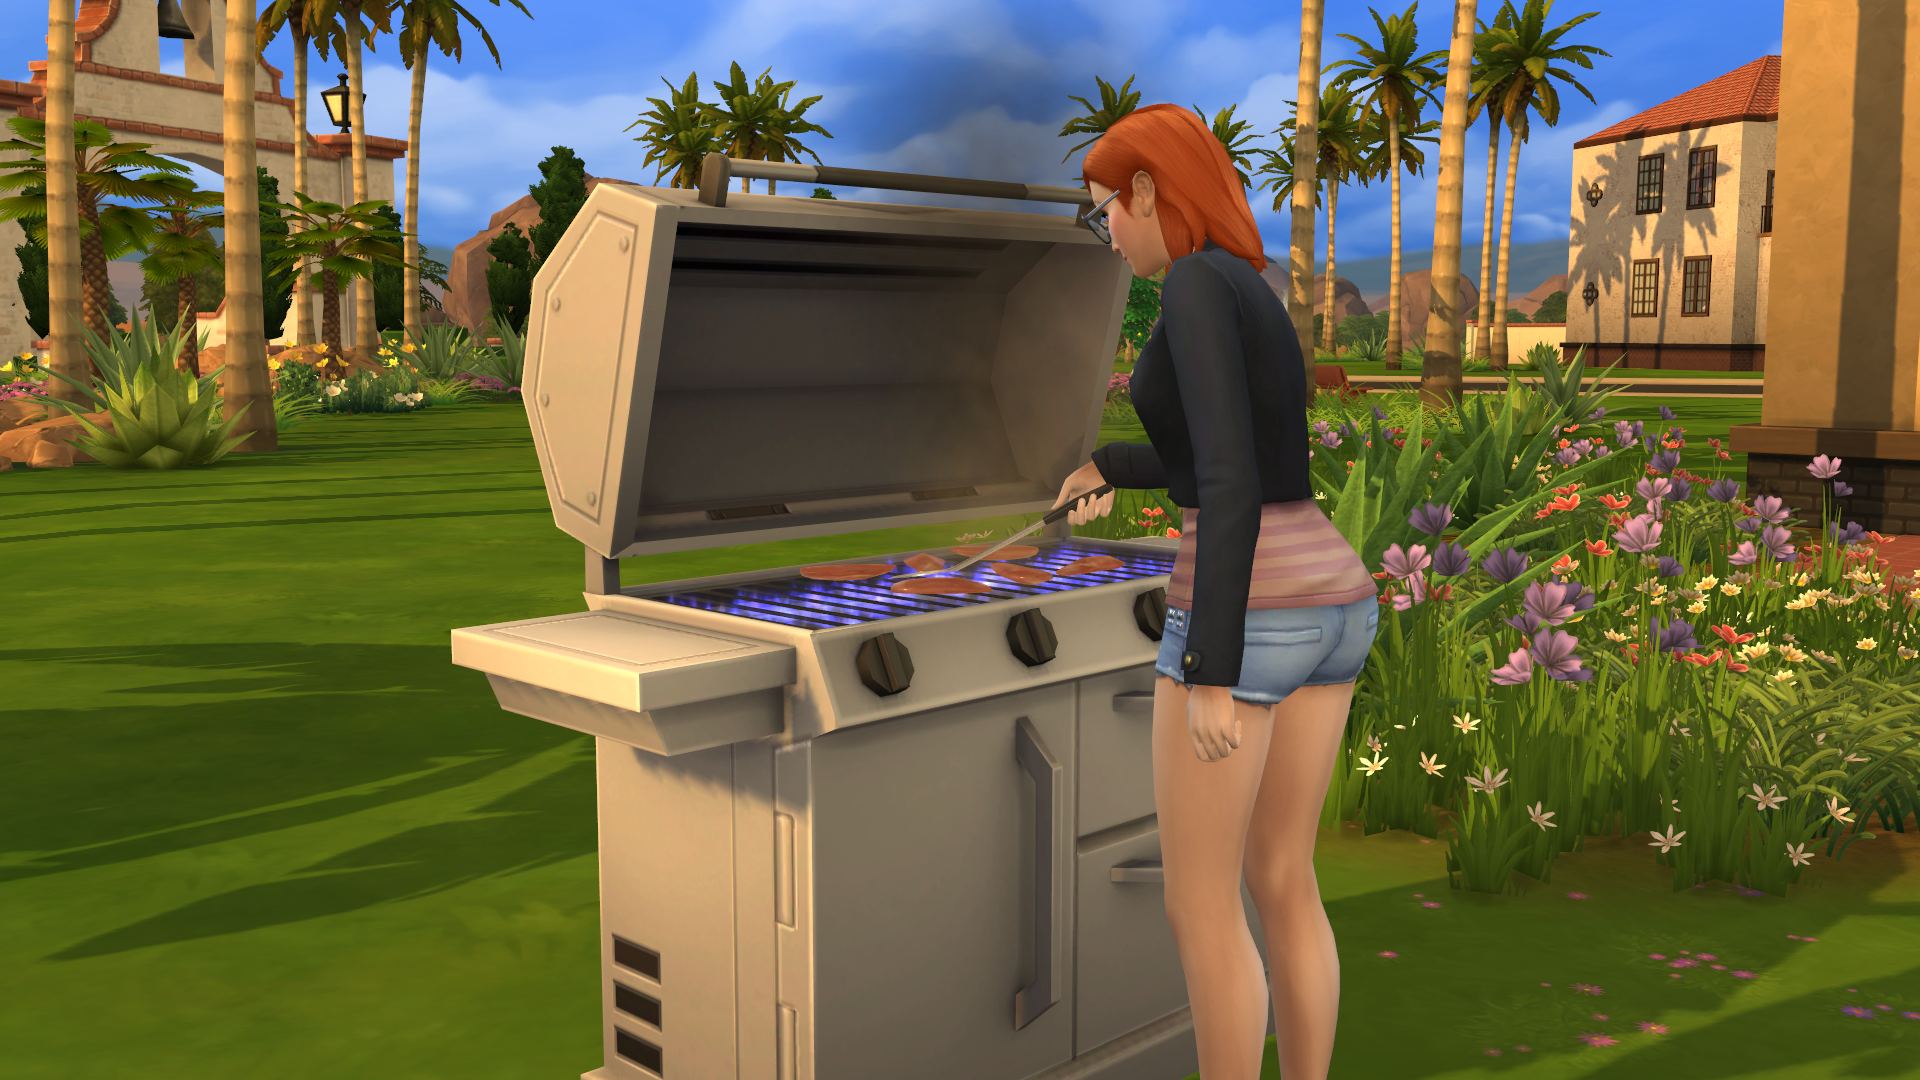 All Sims 4 Skill Cheats List, Listed - How to unlock all skills